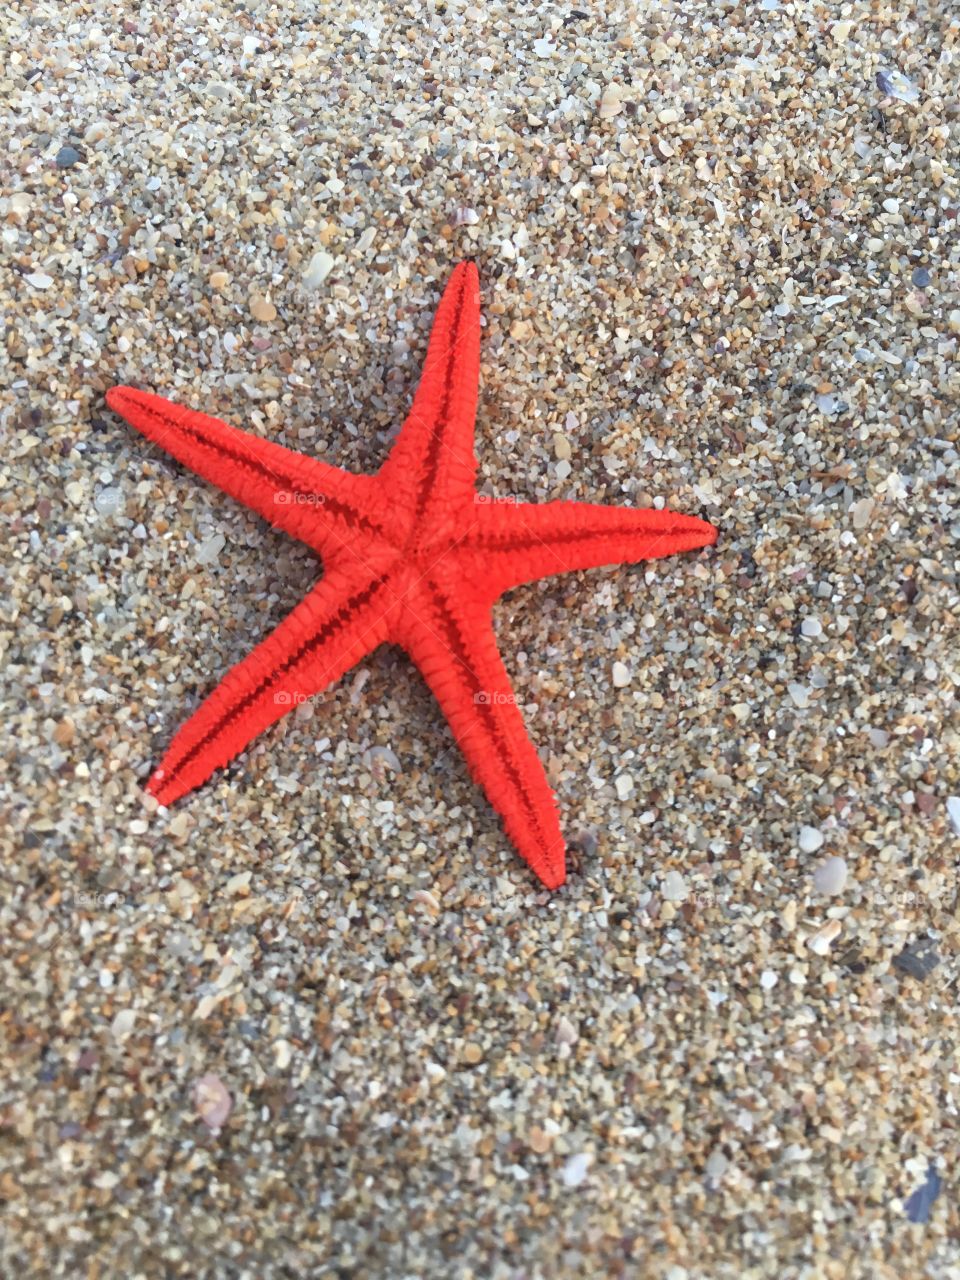 Red Sea star on sand background